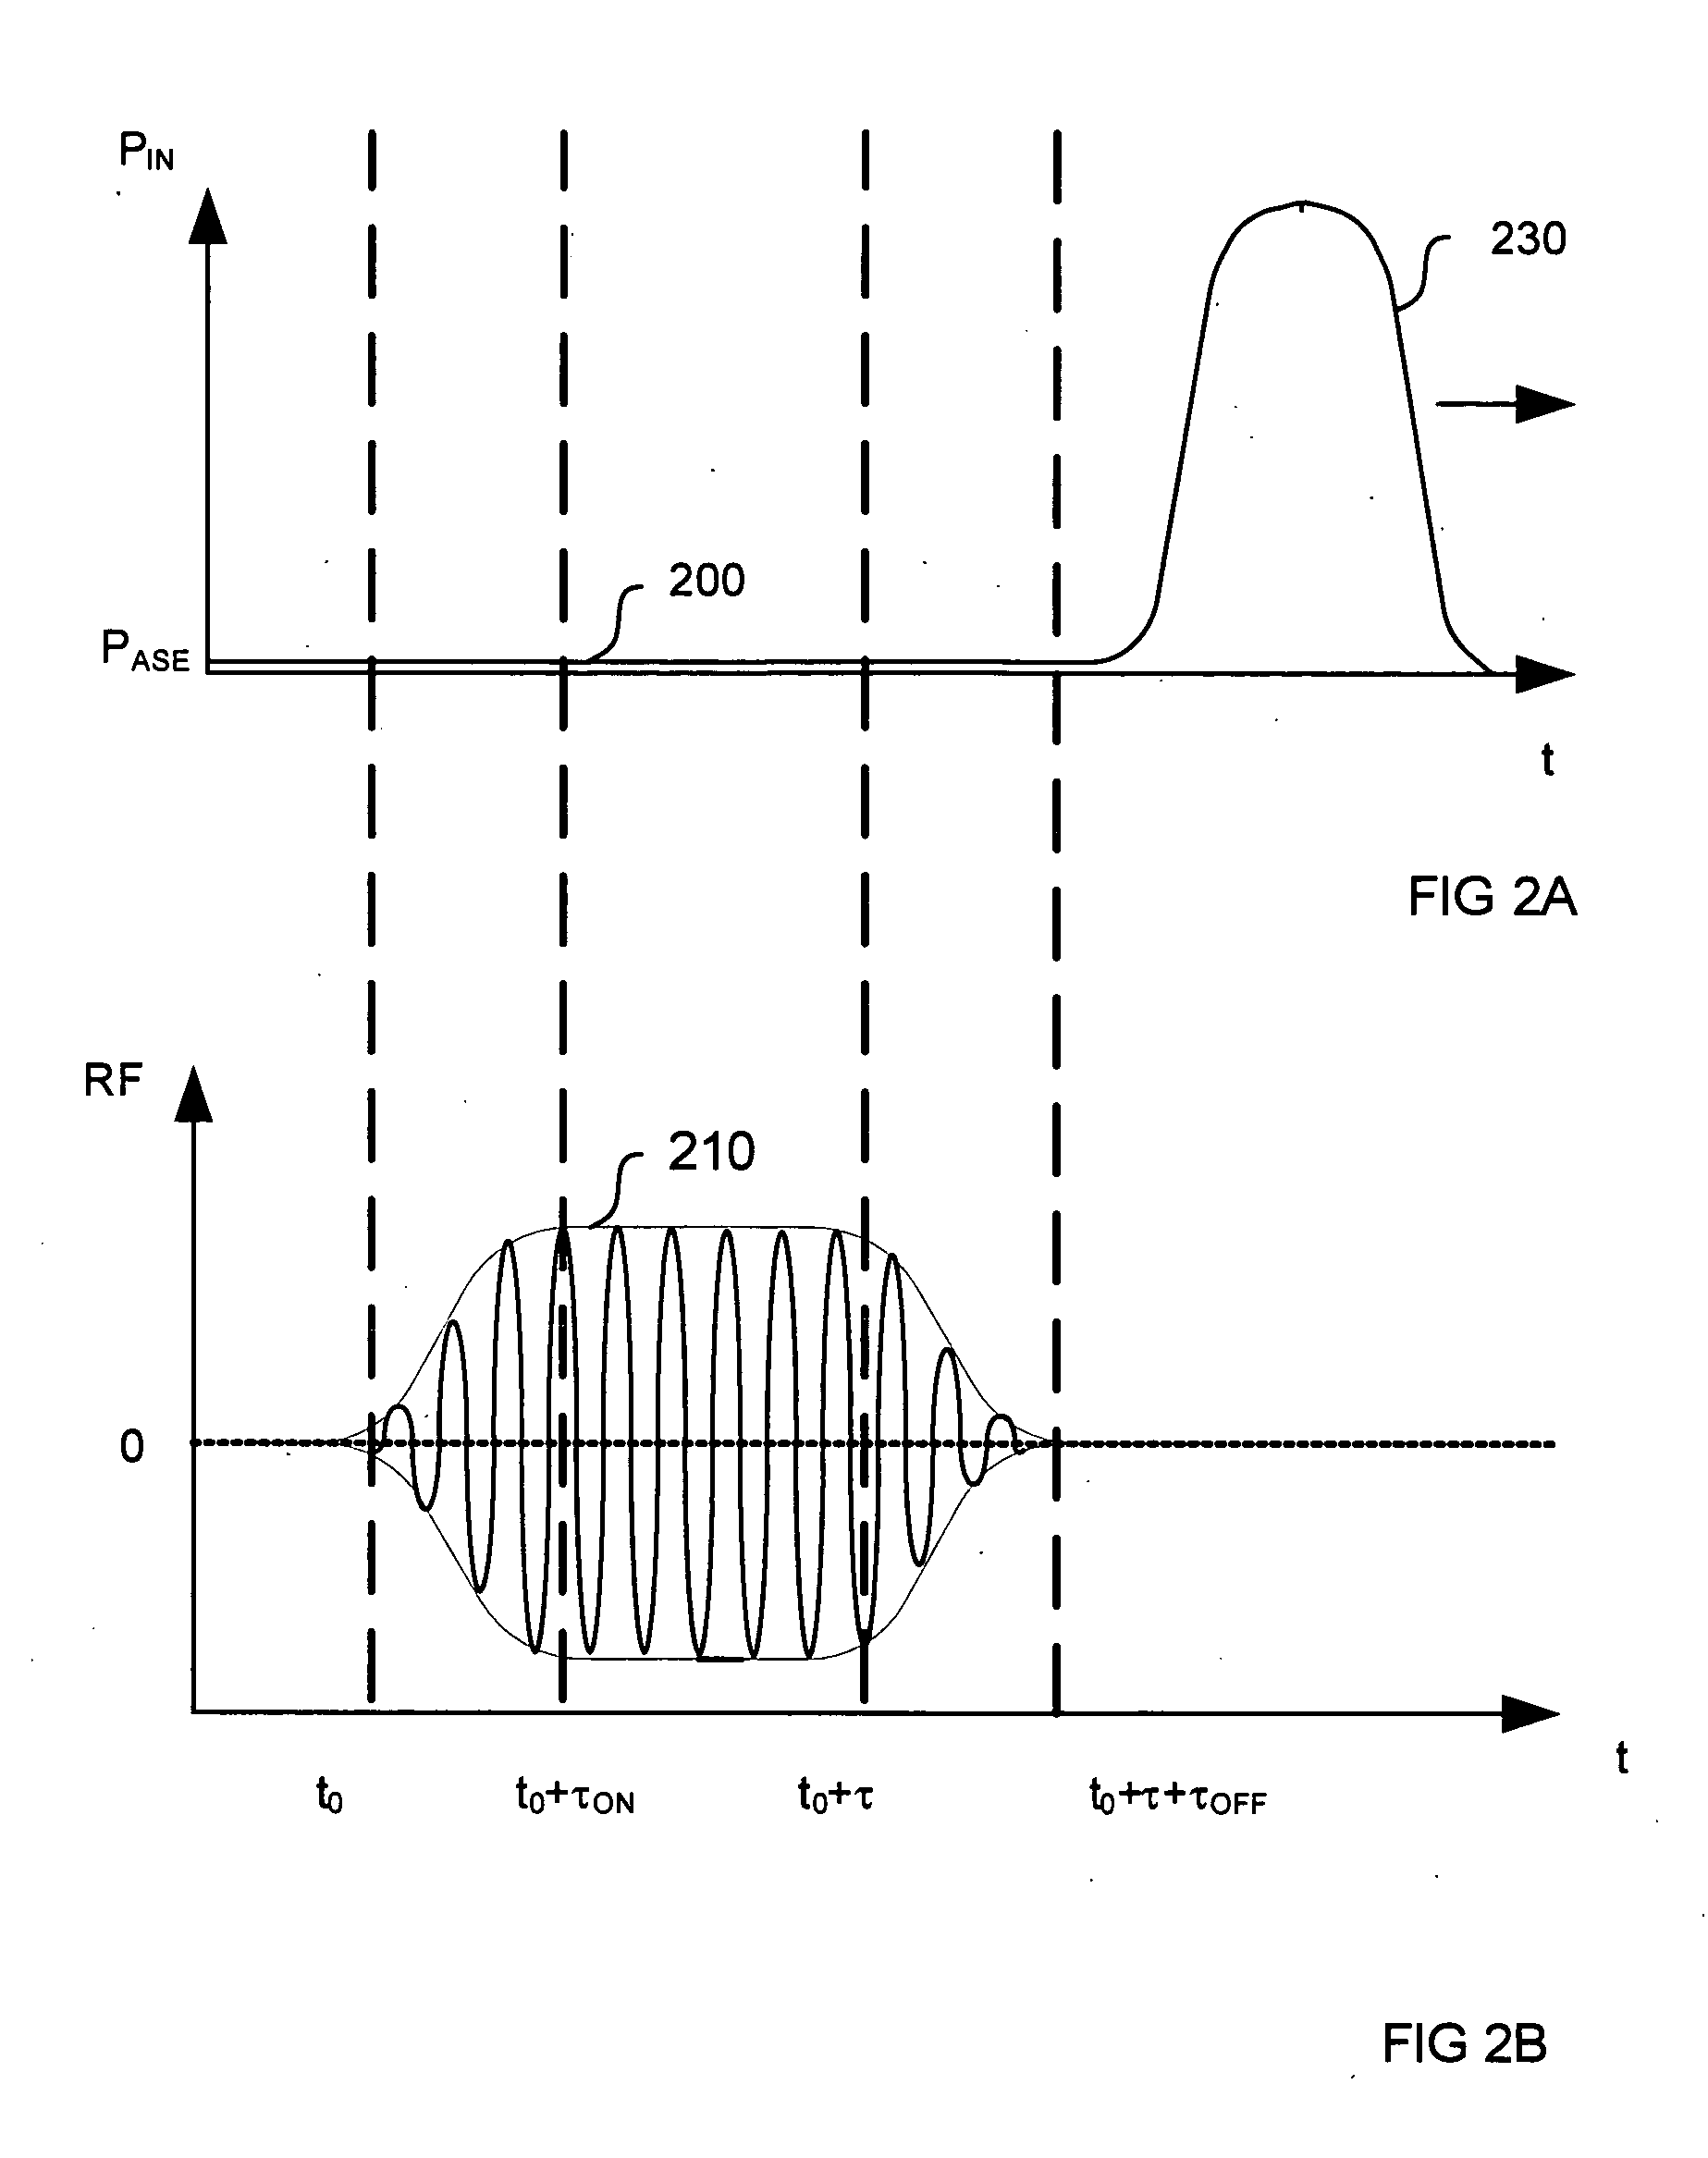 Pulsed laser apparatus and method